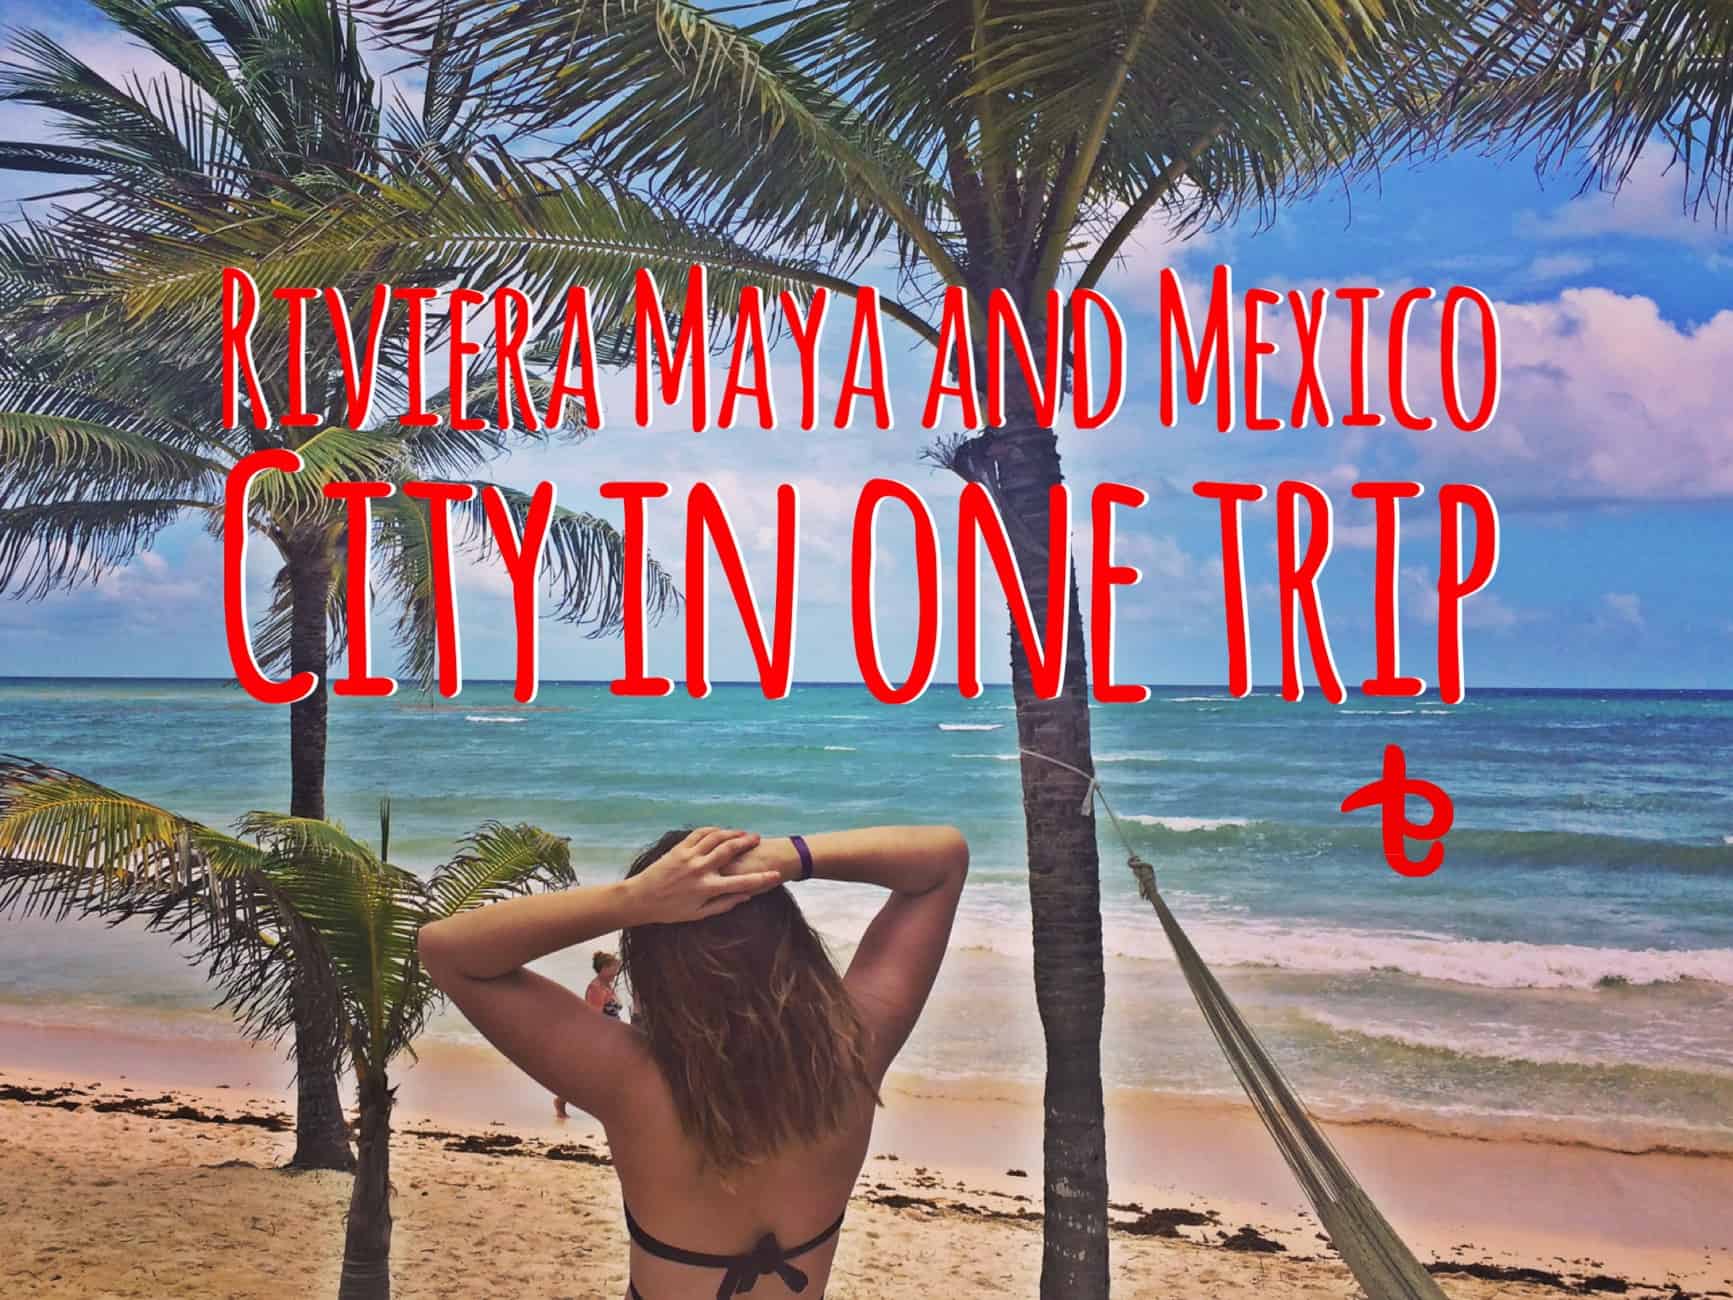 Mexico City and Riviera Maya in one trip: our experience